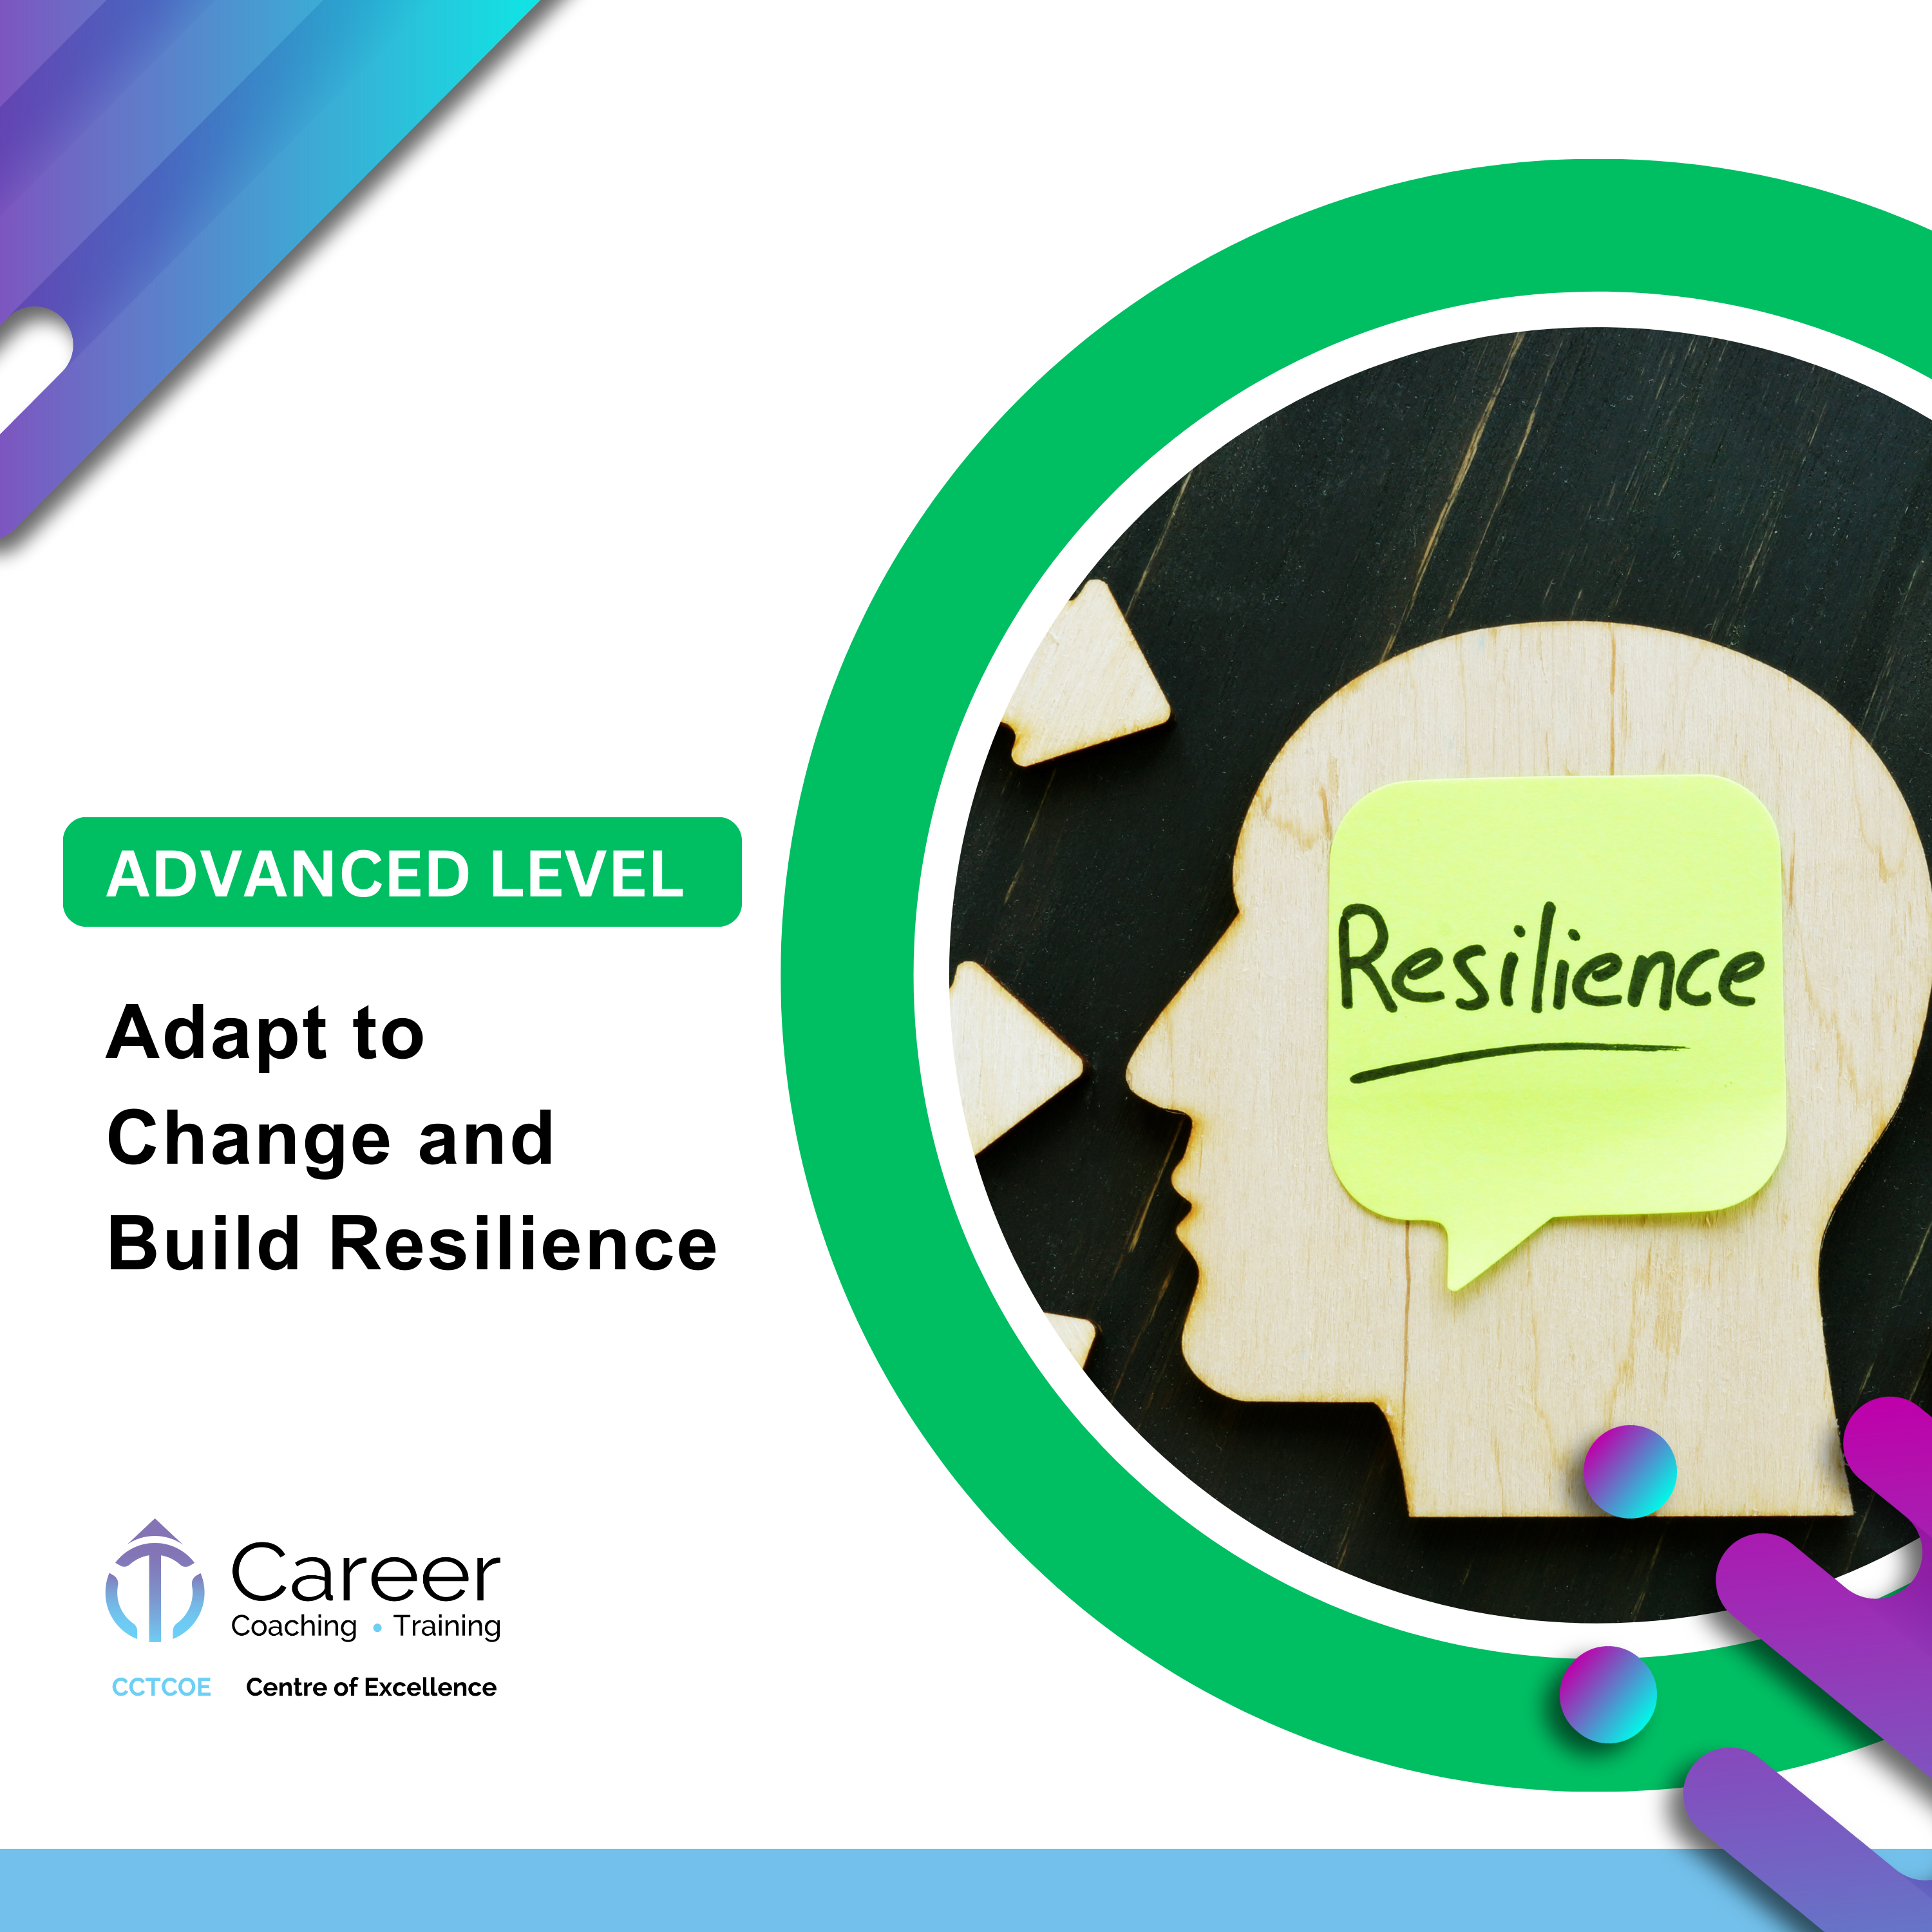 Adapt to Change and Build Resilience